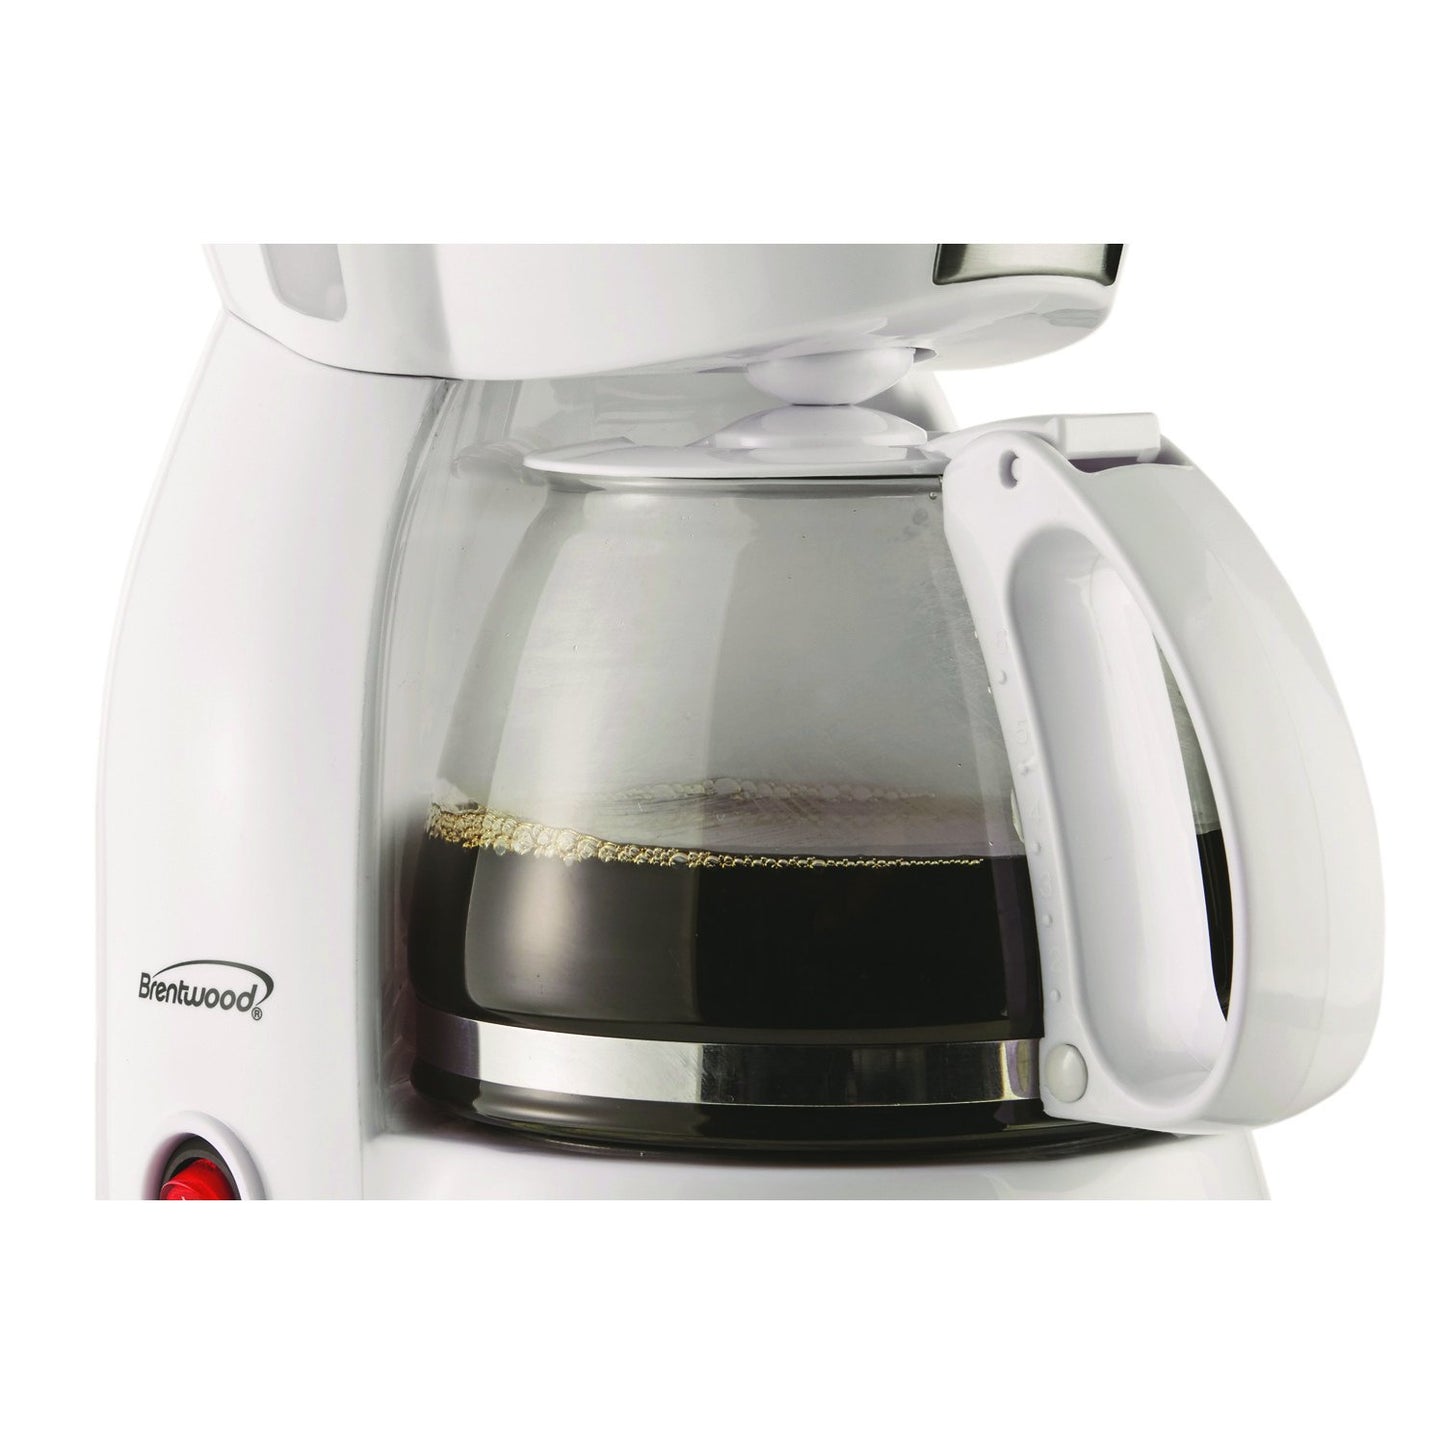 Brentwood Appliances TS-213W 4-Cup Coffee Maker (White)